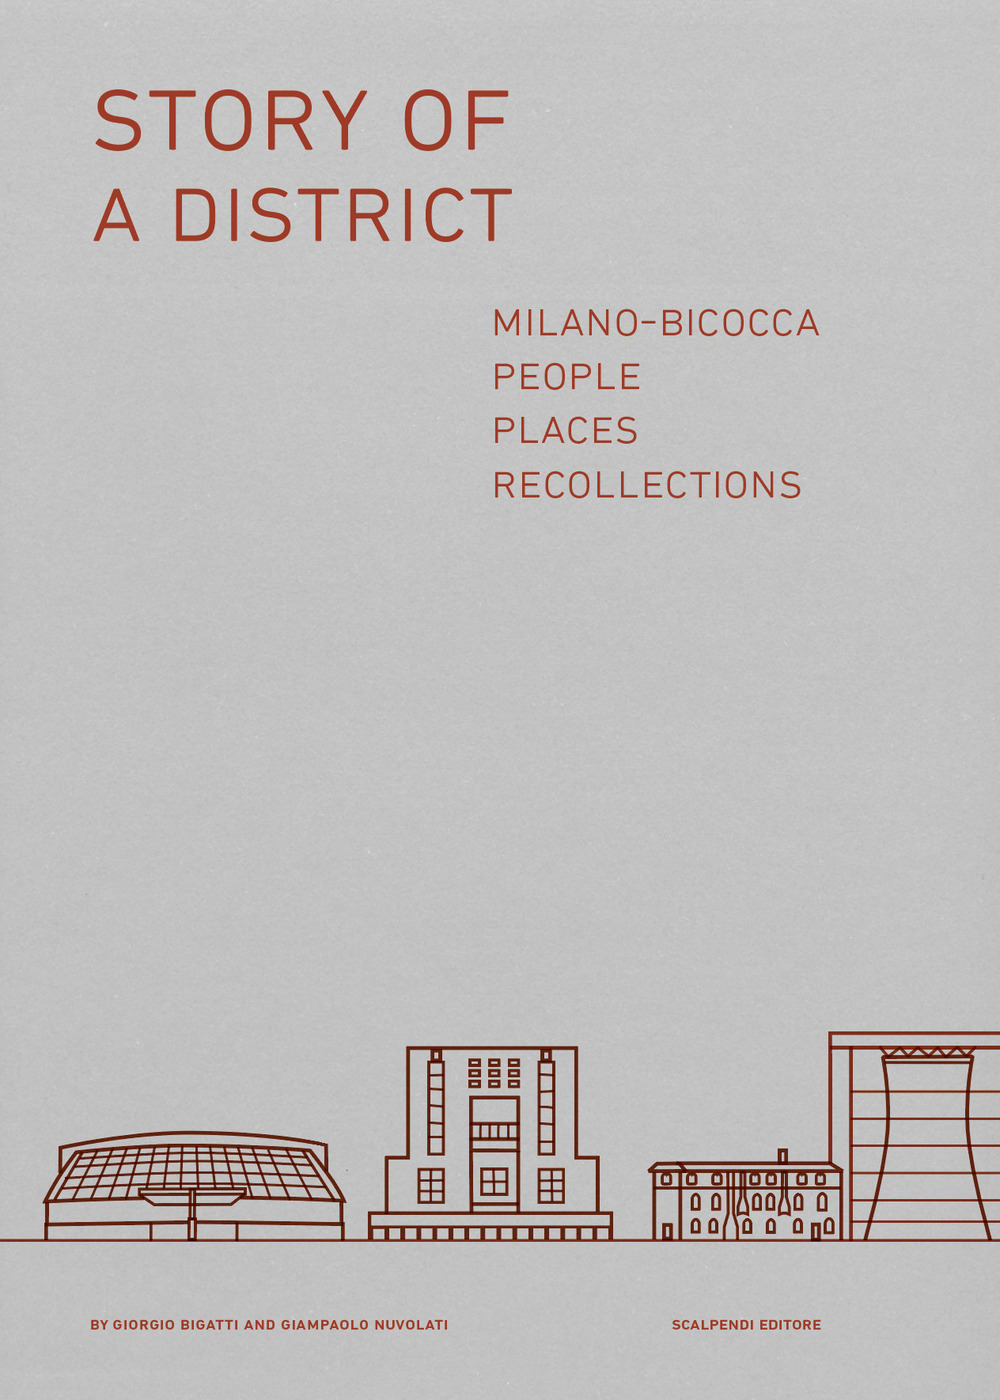 Story of a district. Milano-Bicocca: people, places, recollections